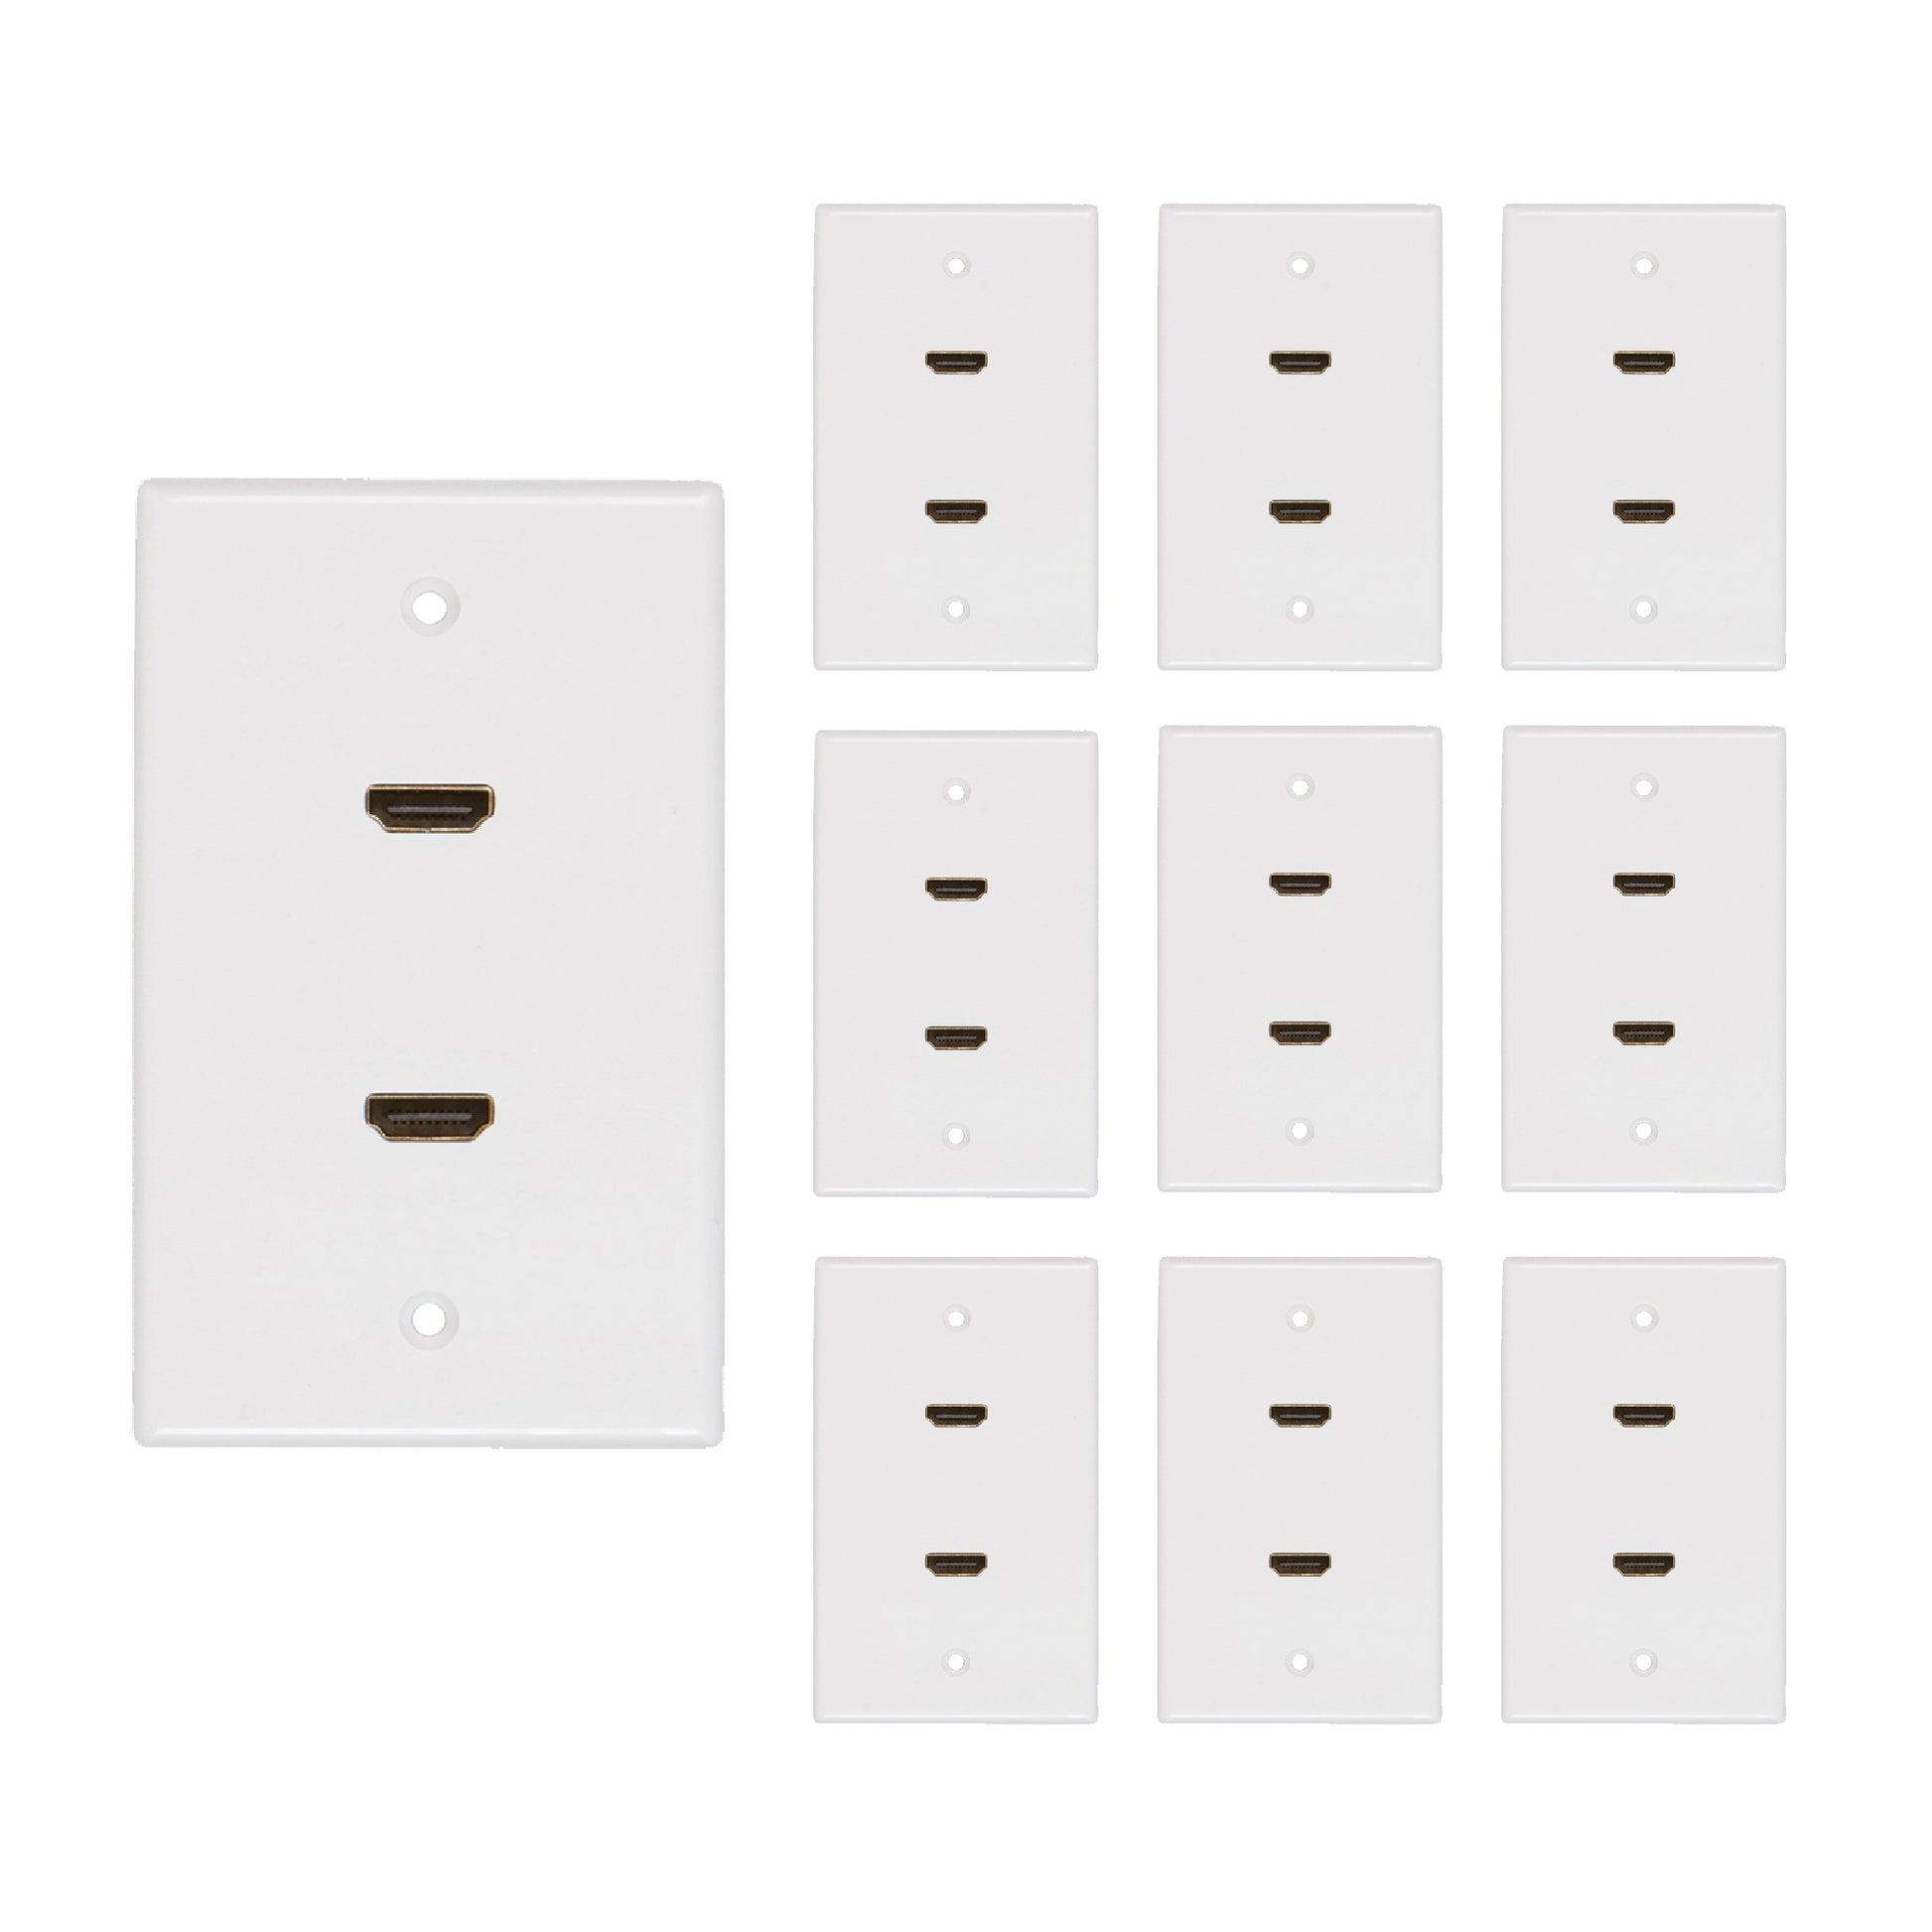 2 Port HDMI Wall Plate [UL Listed] Insert Built-in Hi-Speed HDMI Cable with Ethernet- Decora Style Jack/Plug for Outlet Port (White 2 Port) - Milena International Inc